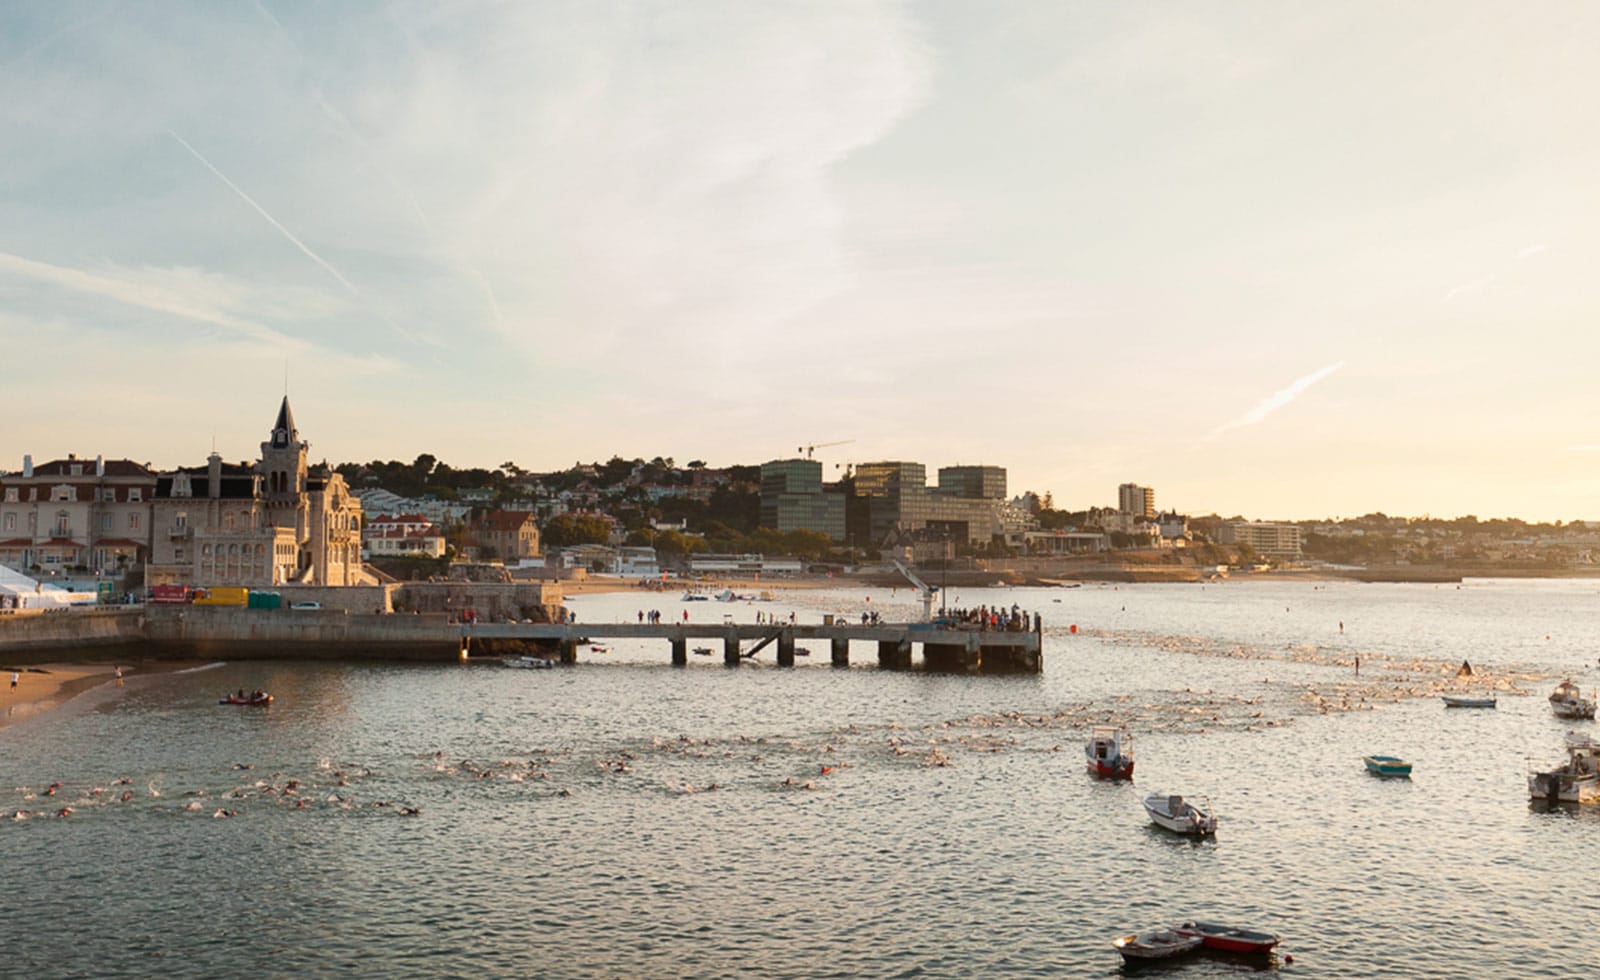 More than 100 professionals in the IRONMAN 70.3 Cascais